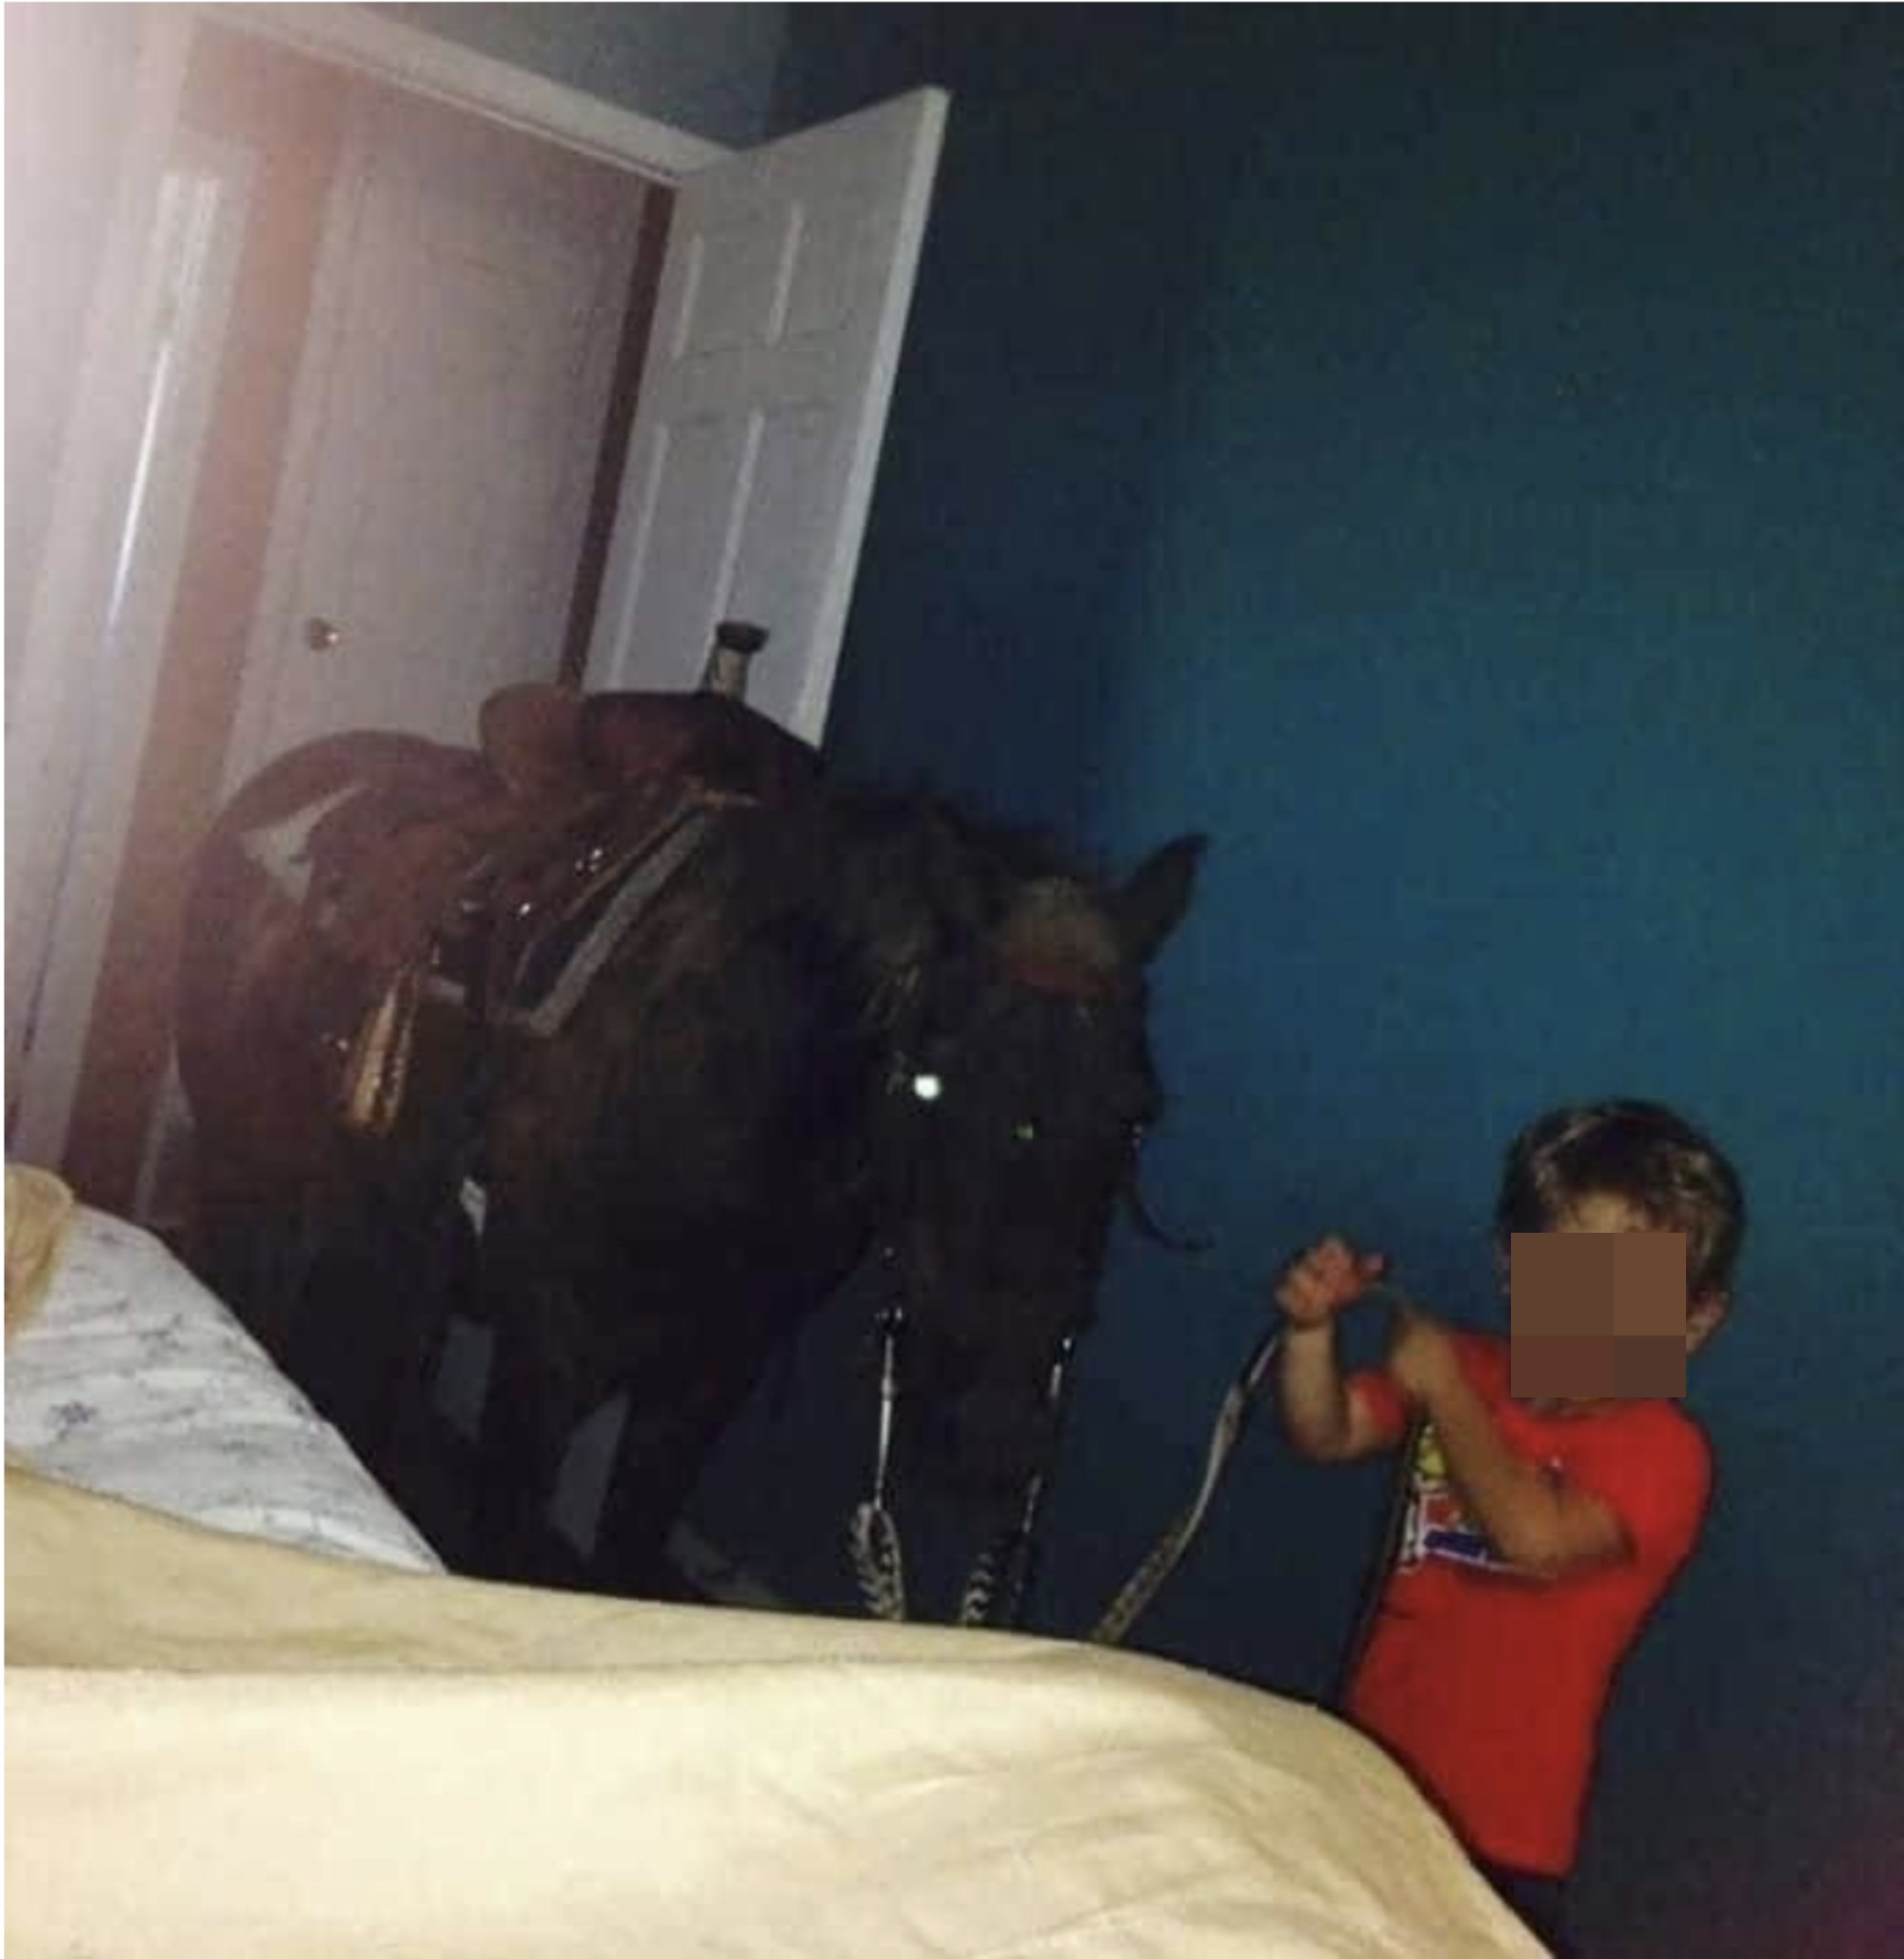 a kid bringing in a pony into the bedroom